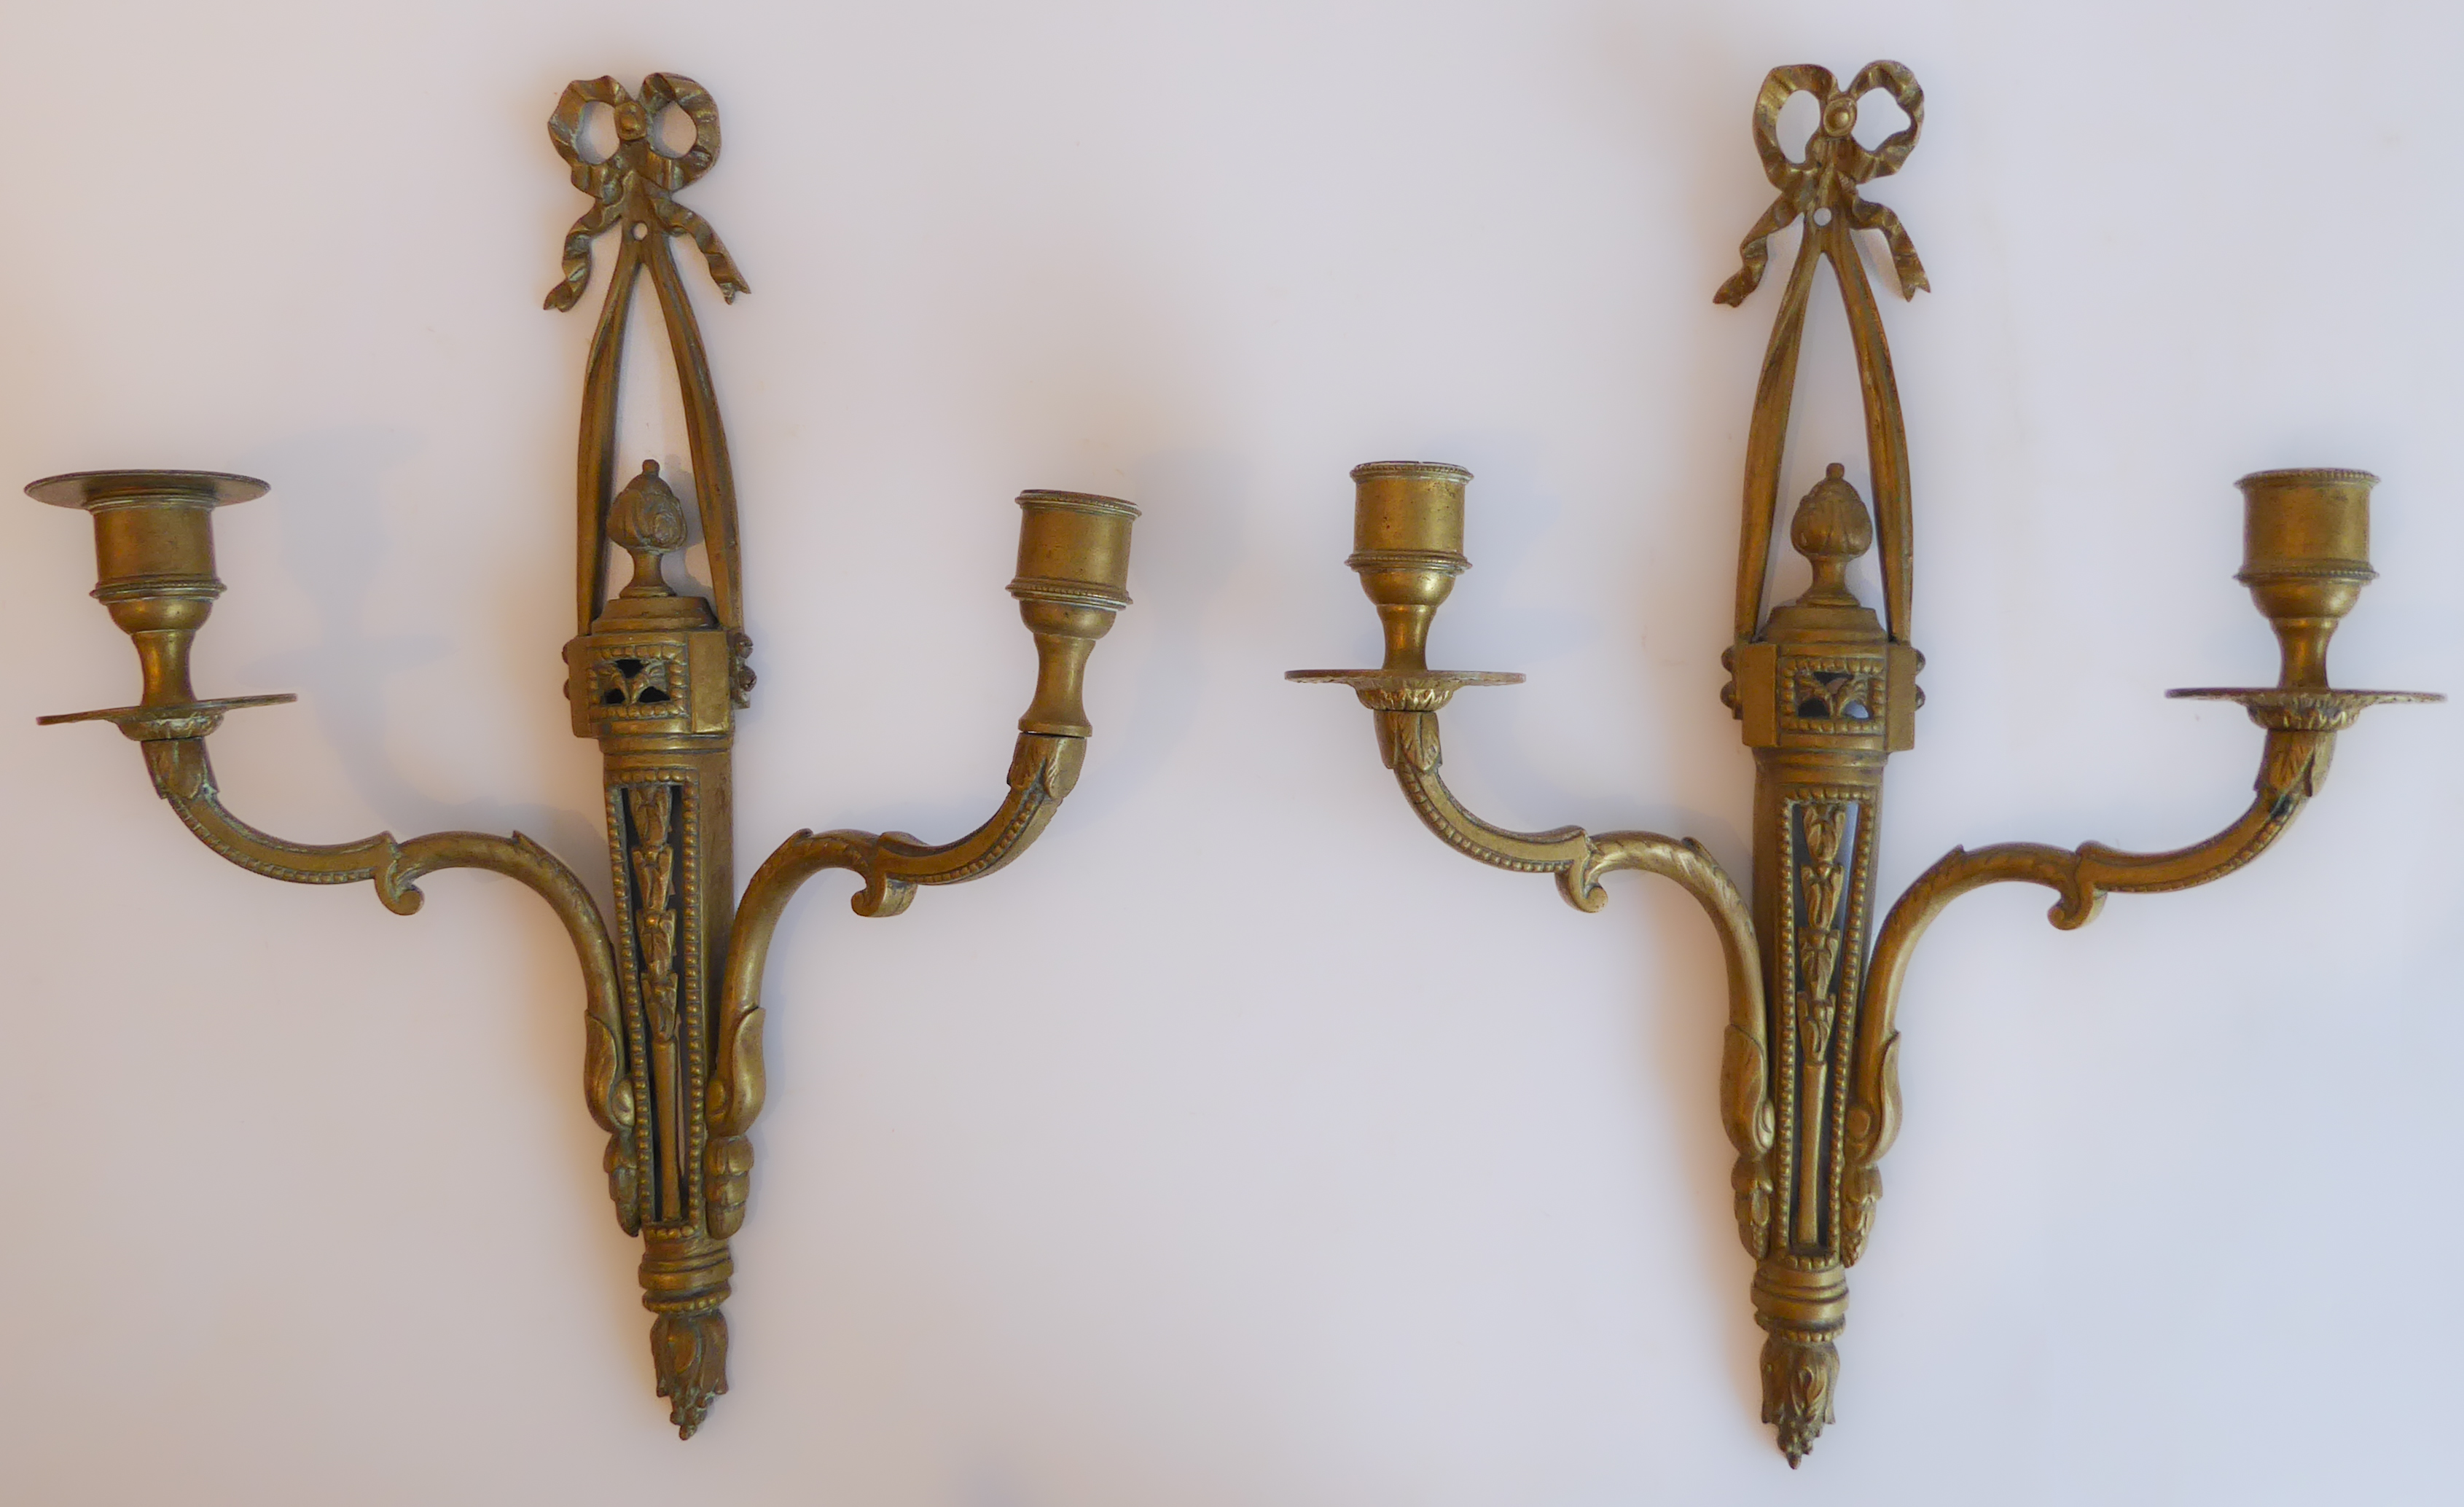 A pair of early 20th century two-light brass wall appliques in Louis XVI style (37 cm high)